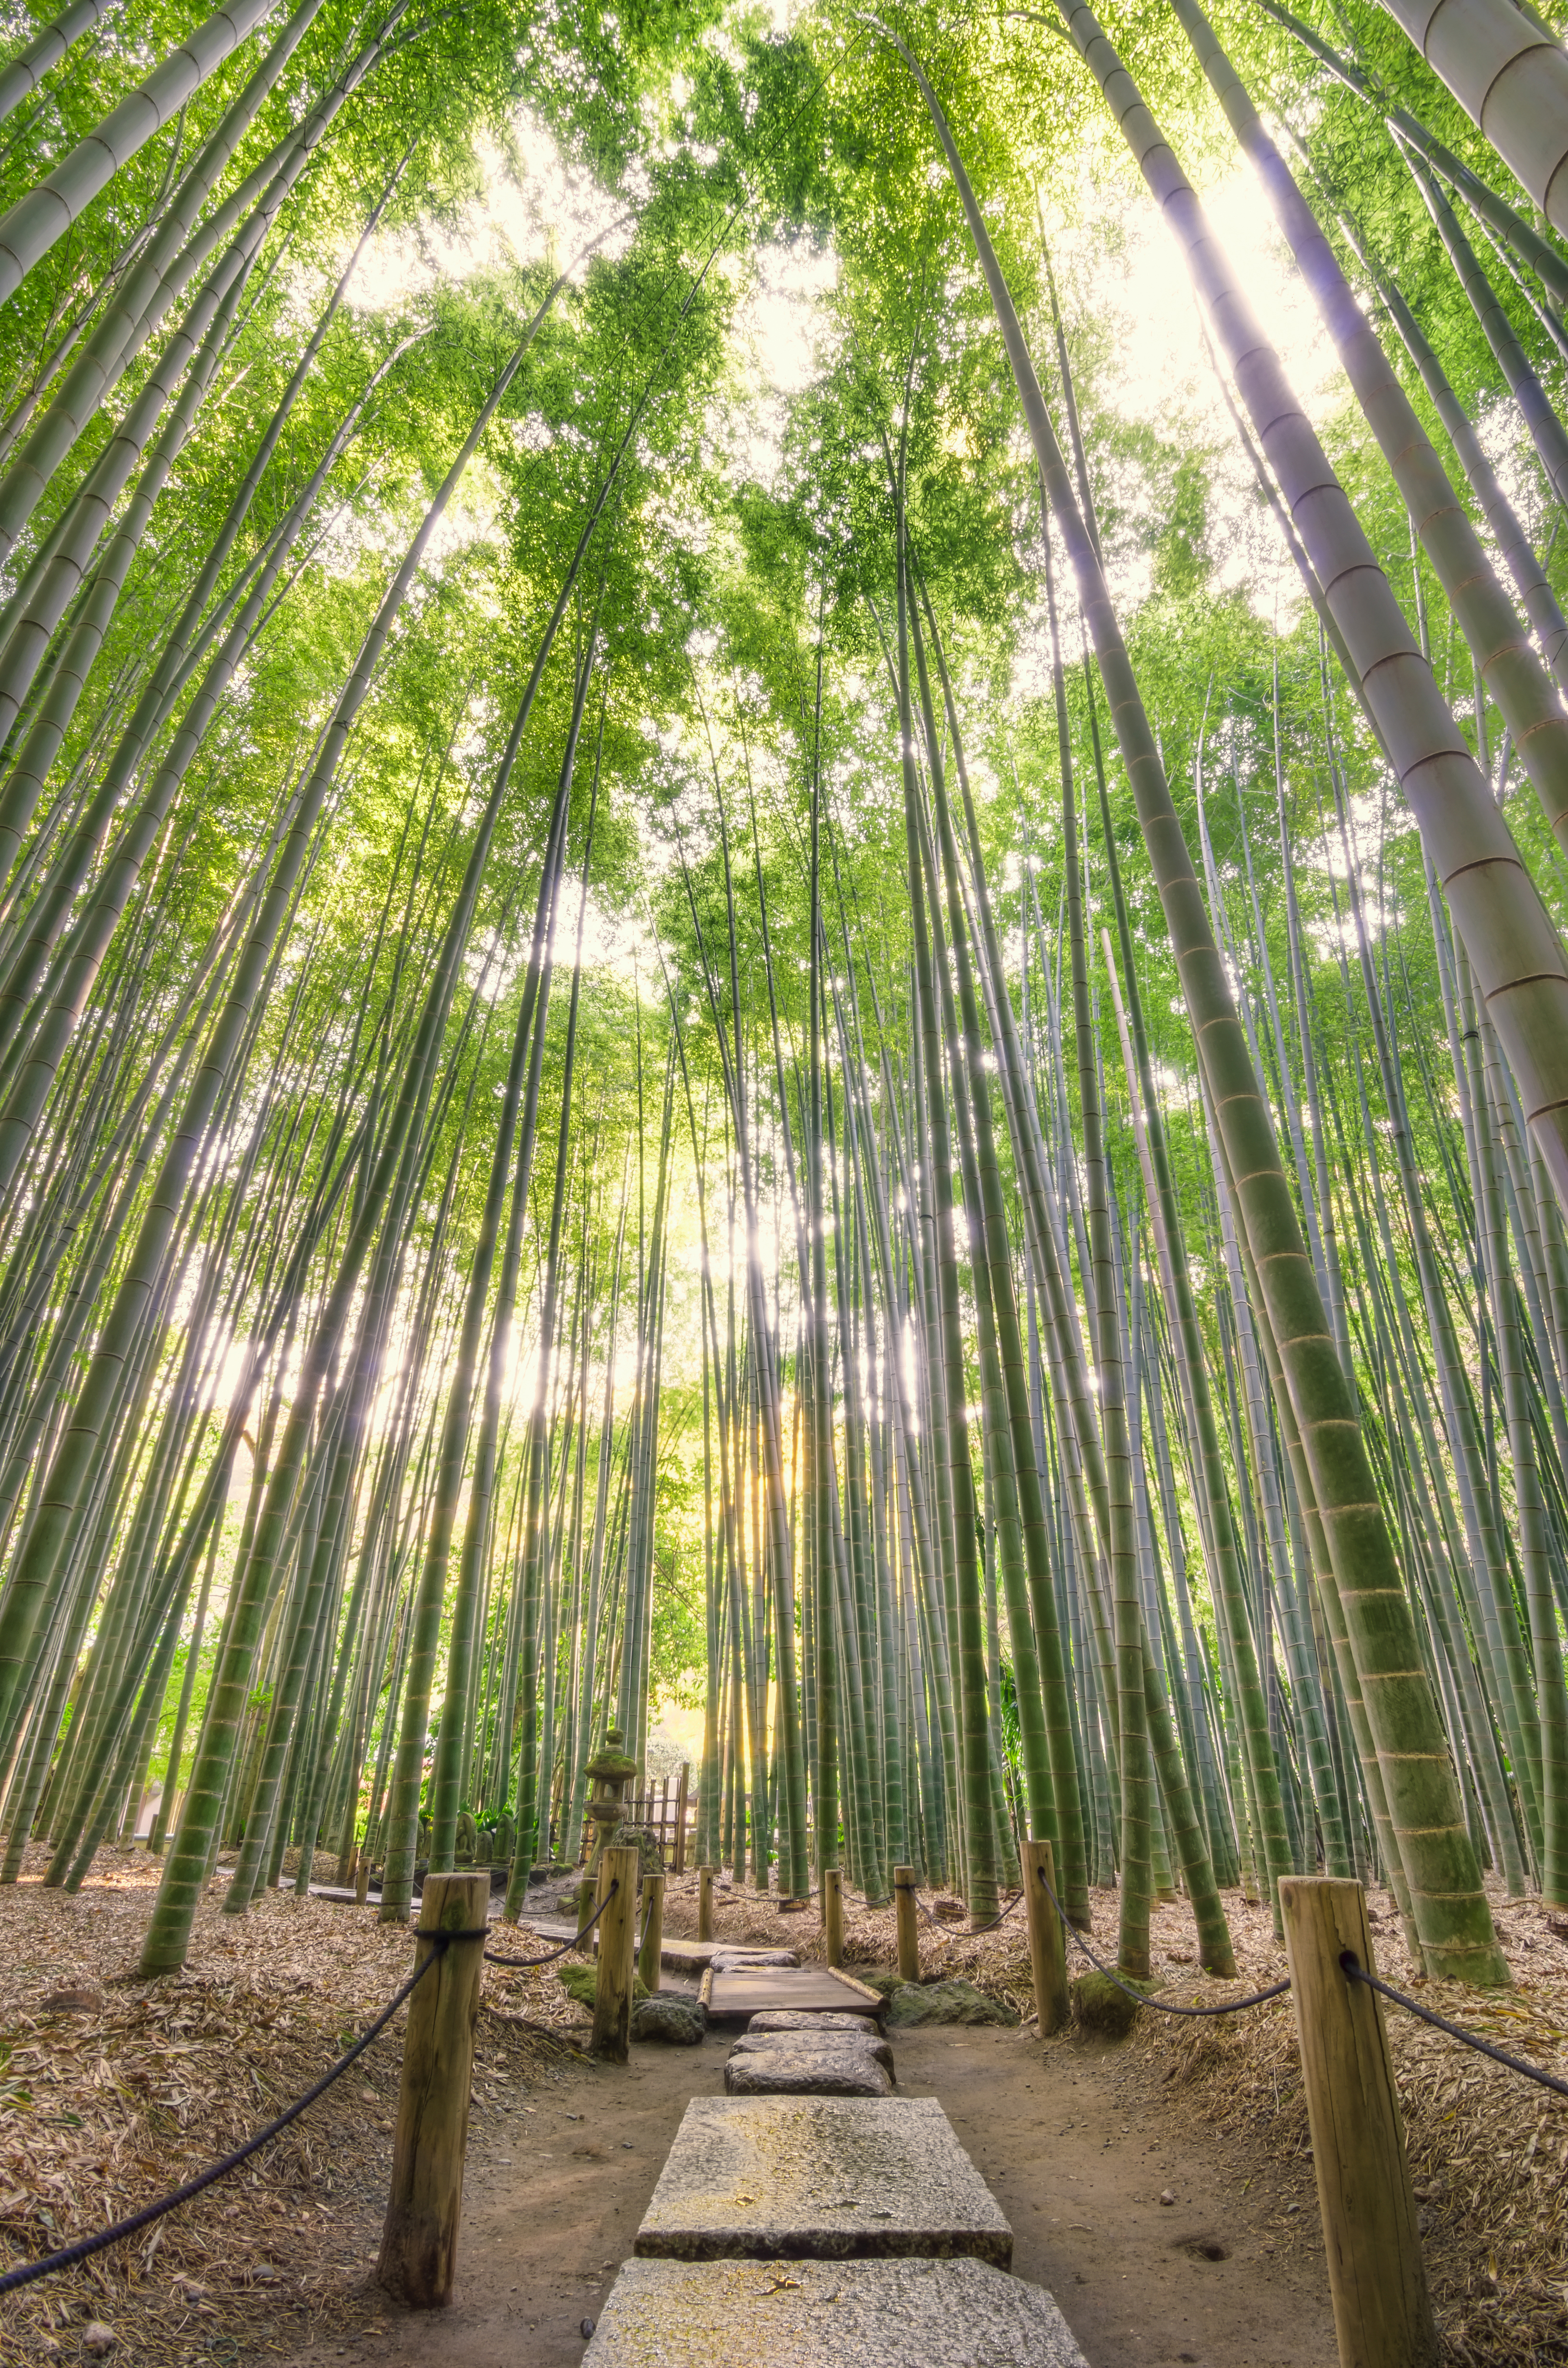 photo of bamboo forest in Japan